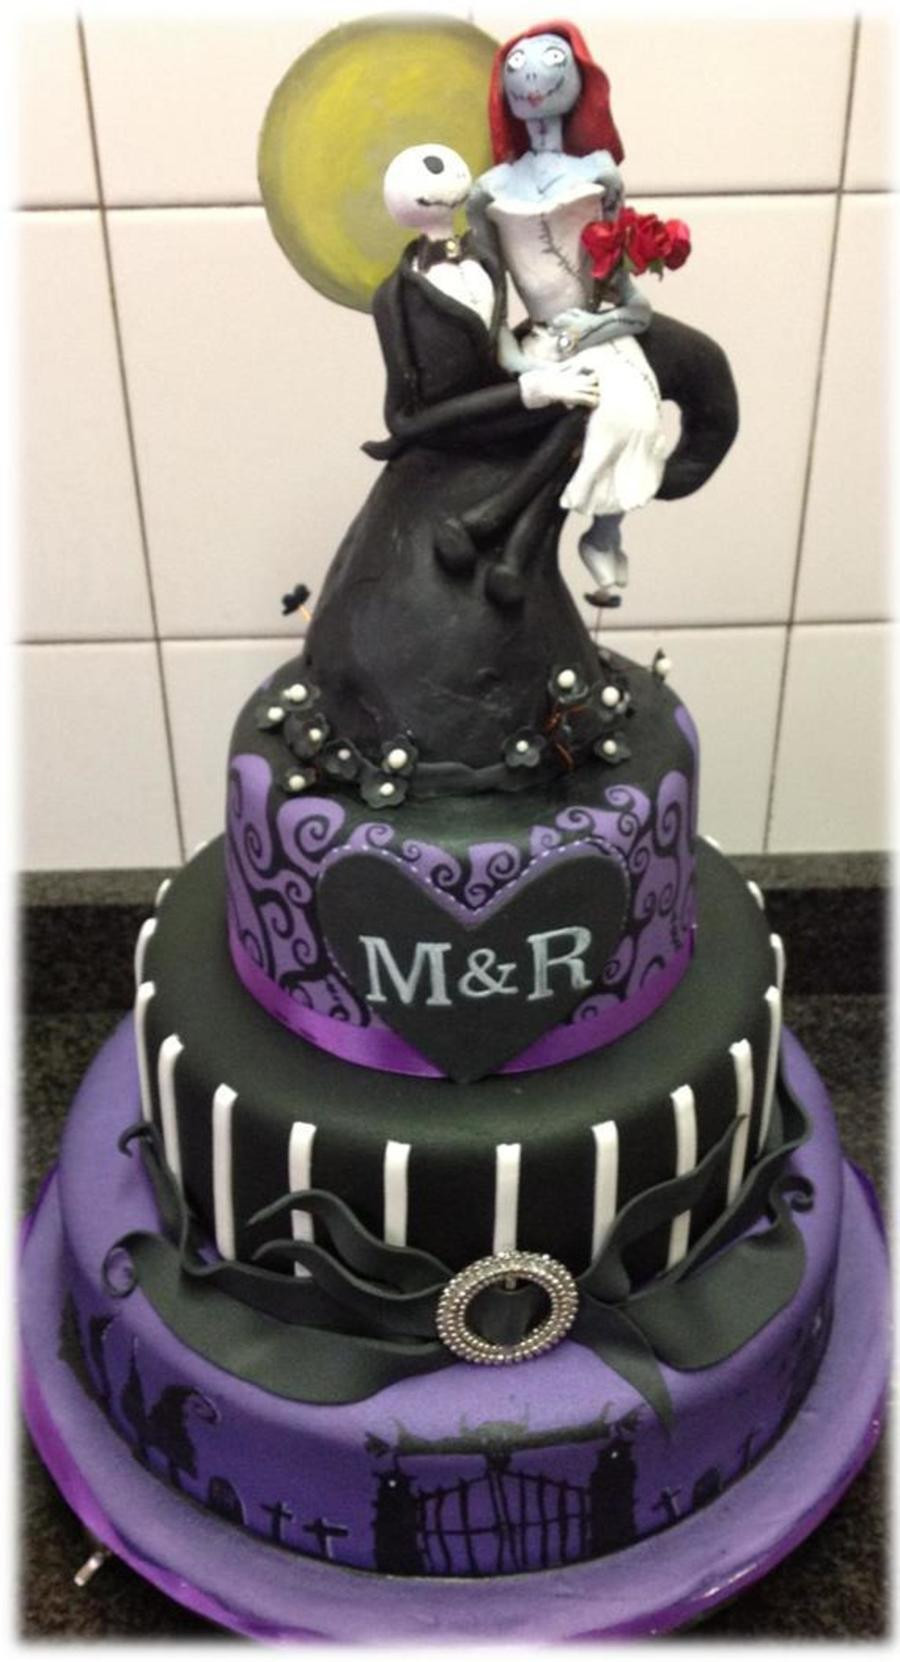 Nightmare Before Christmas Wedding Cakes
 This Was A Wedding Cake For A Couple Who Wanted A